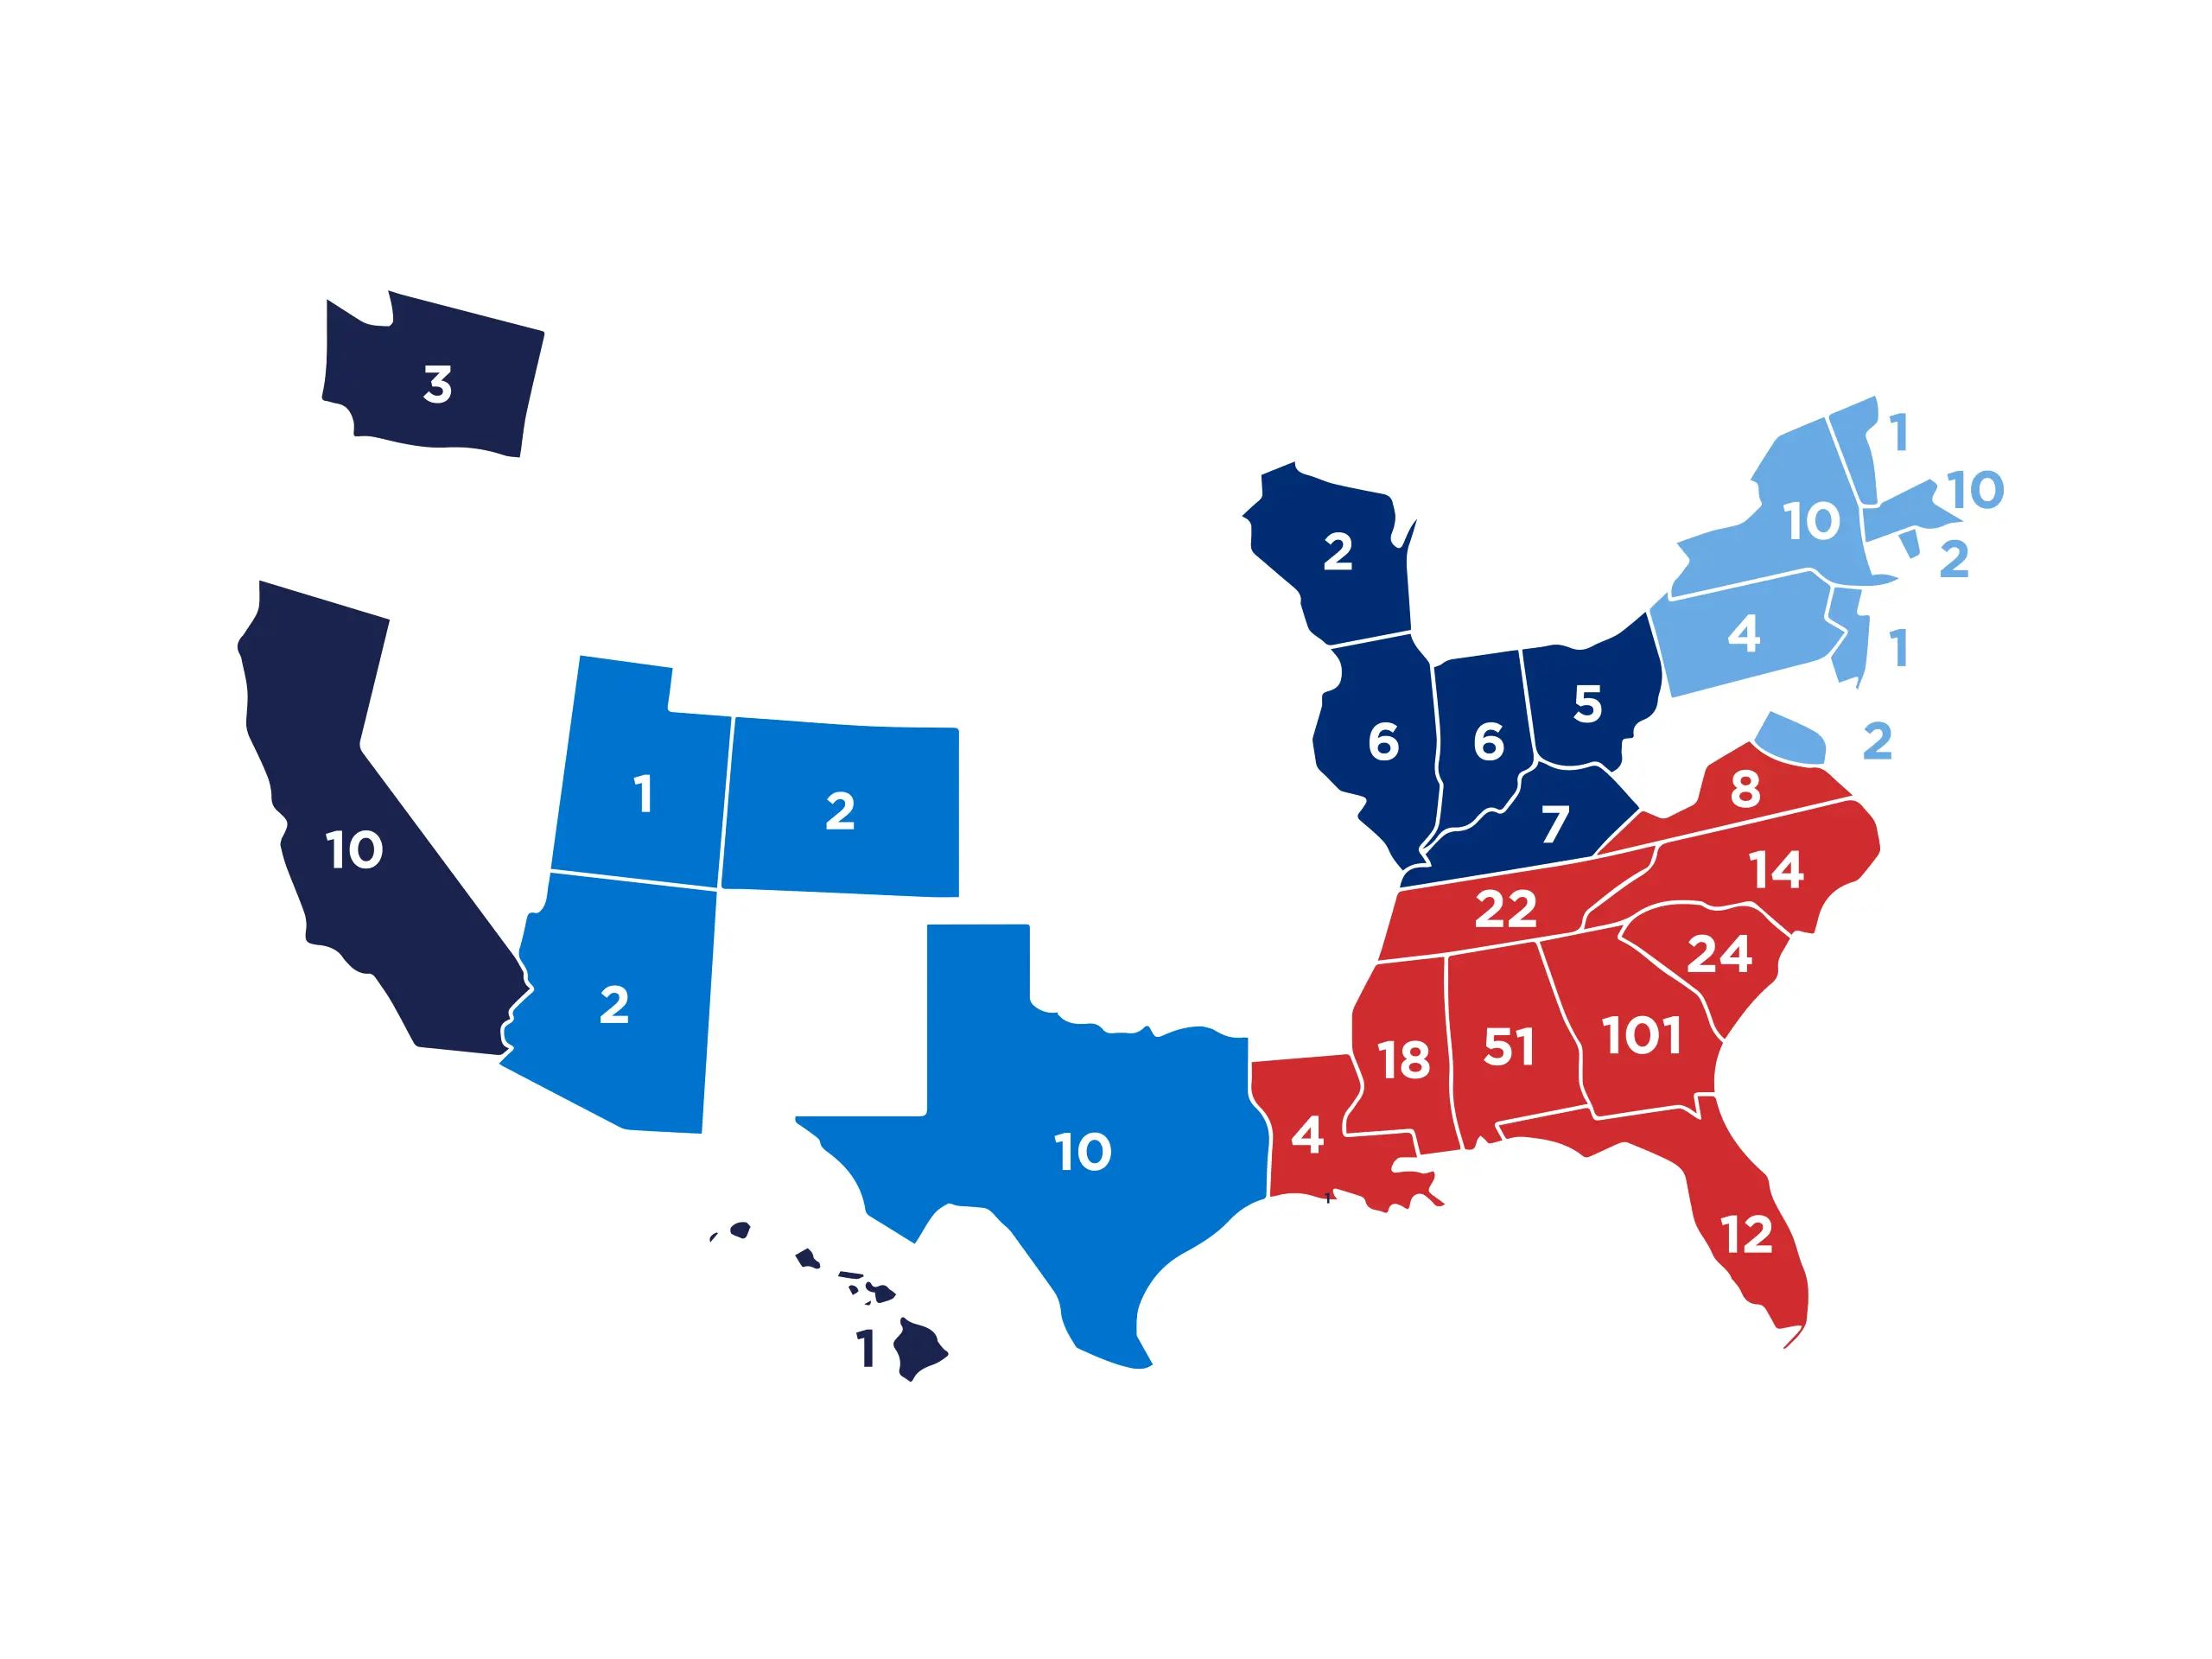 Matriculation map spanning several states